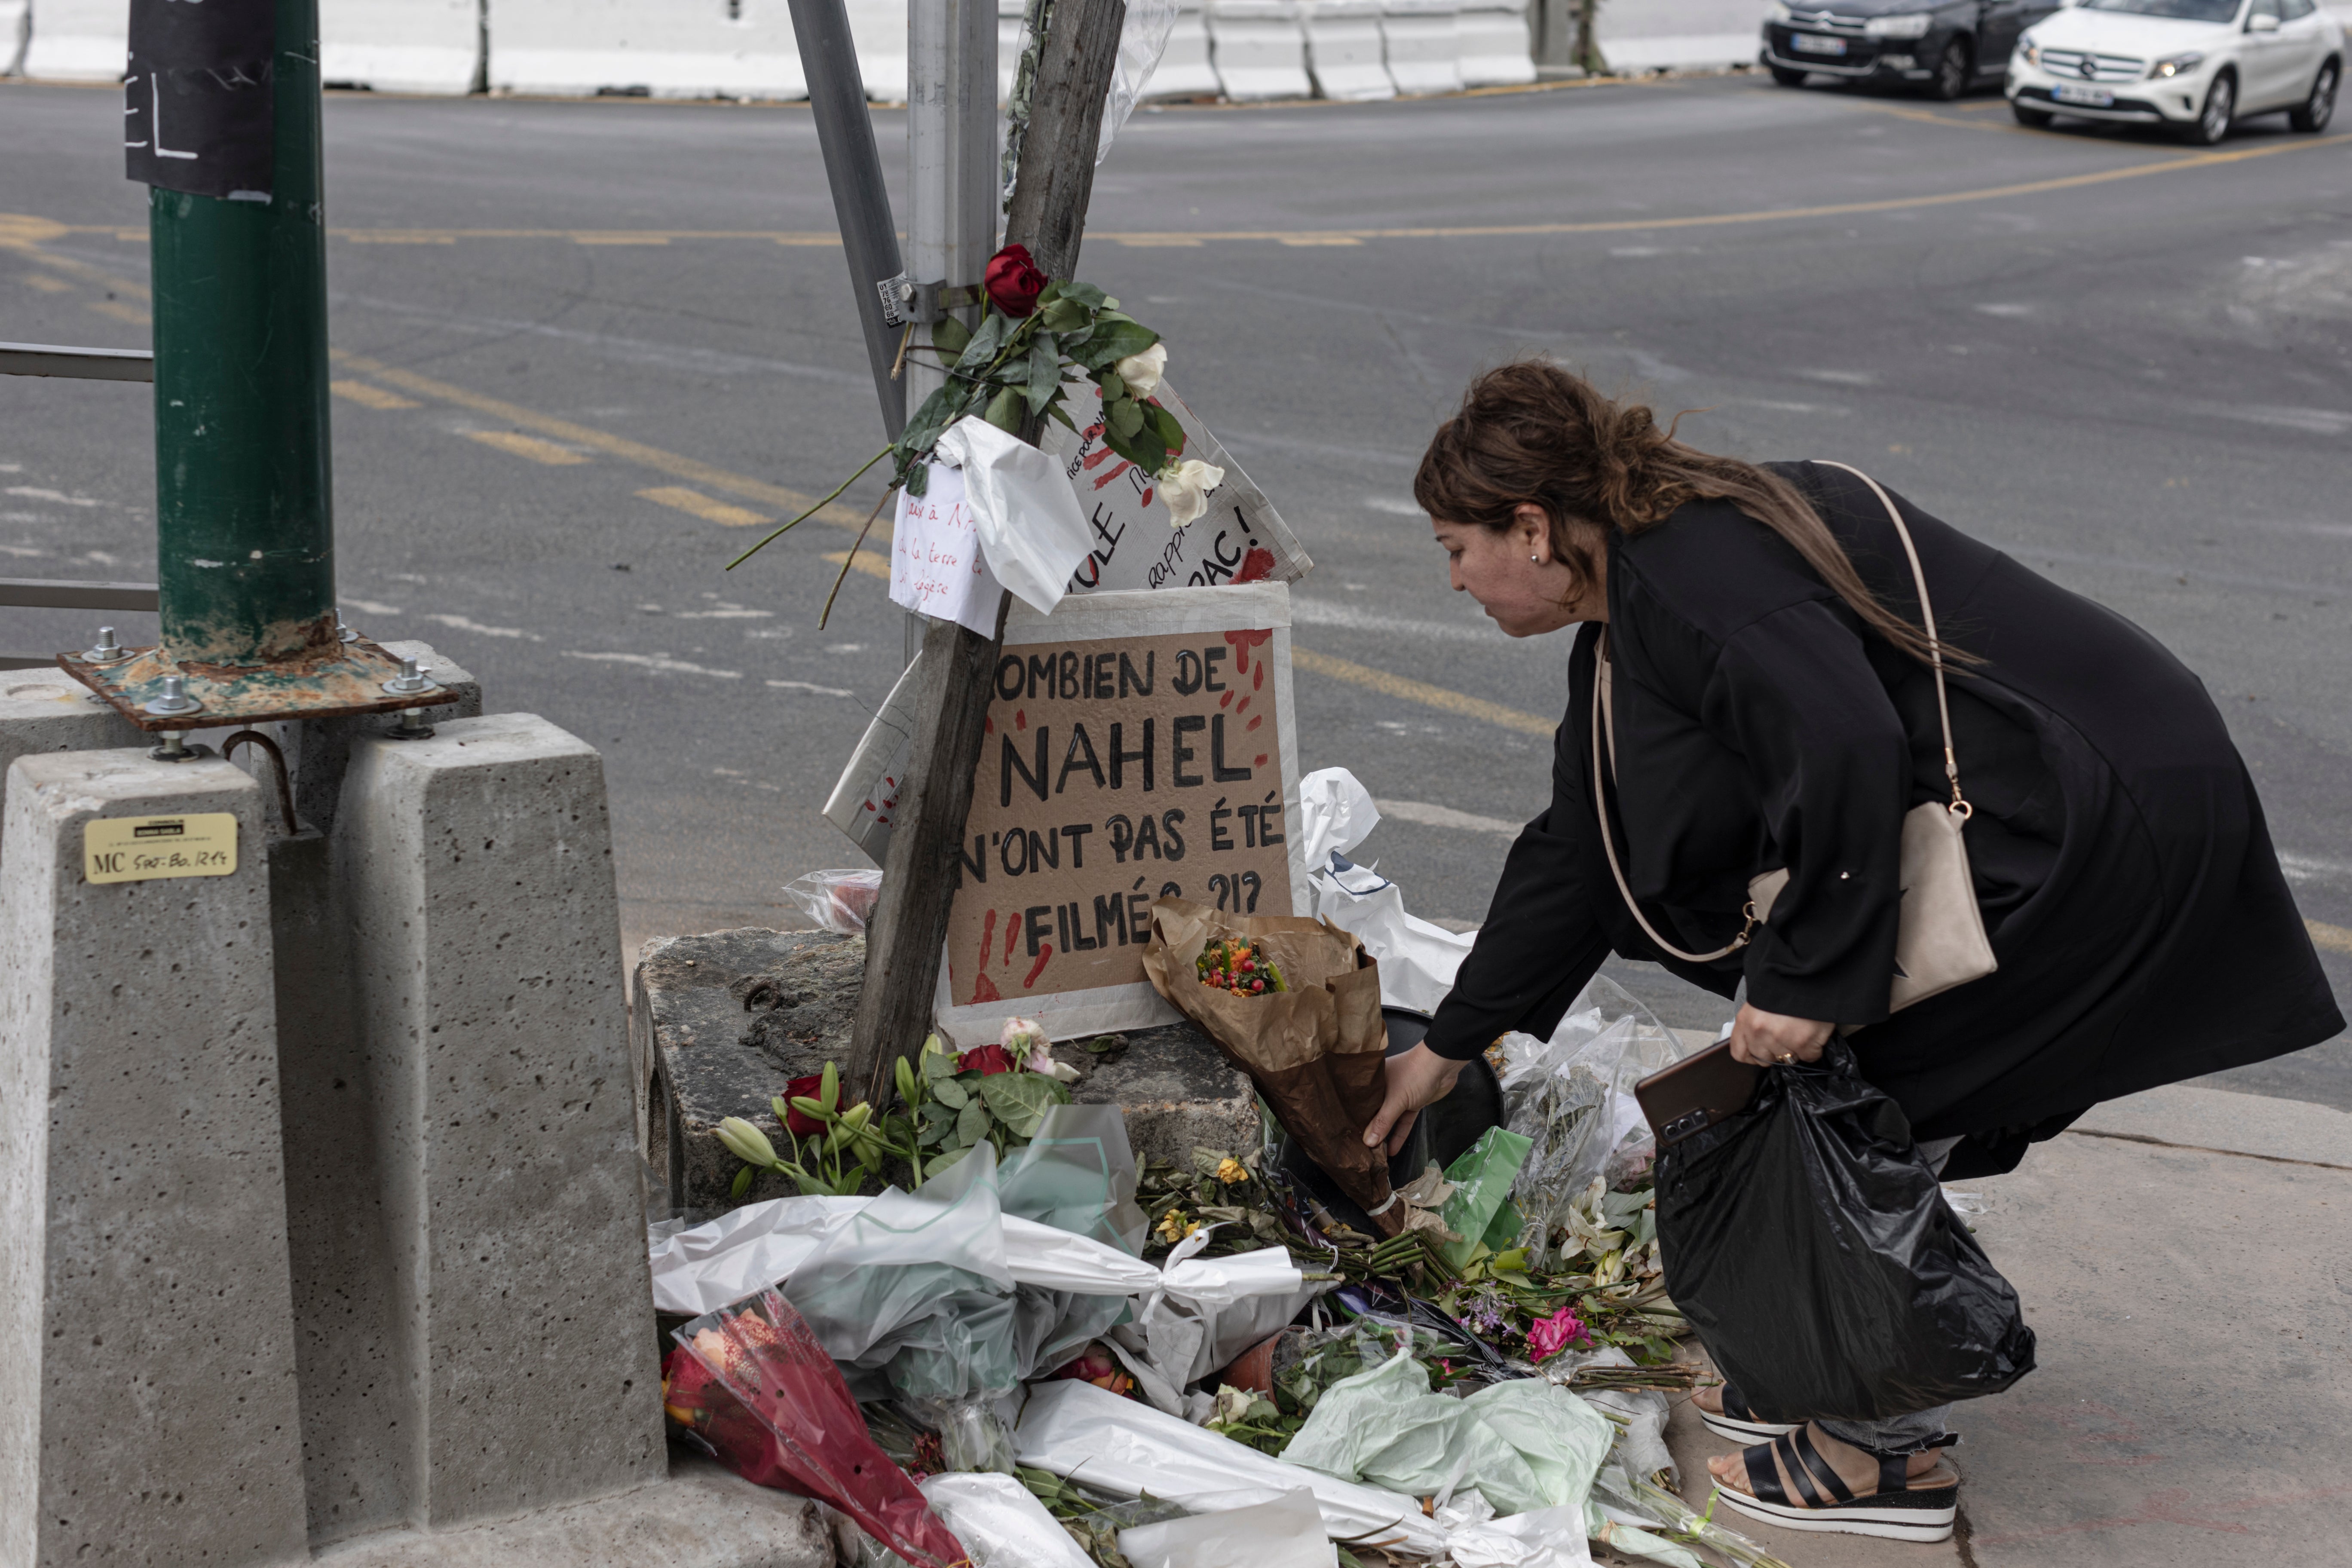 A woman pays her respects at the site where Nahel died